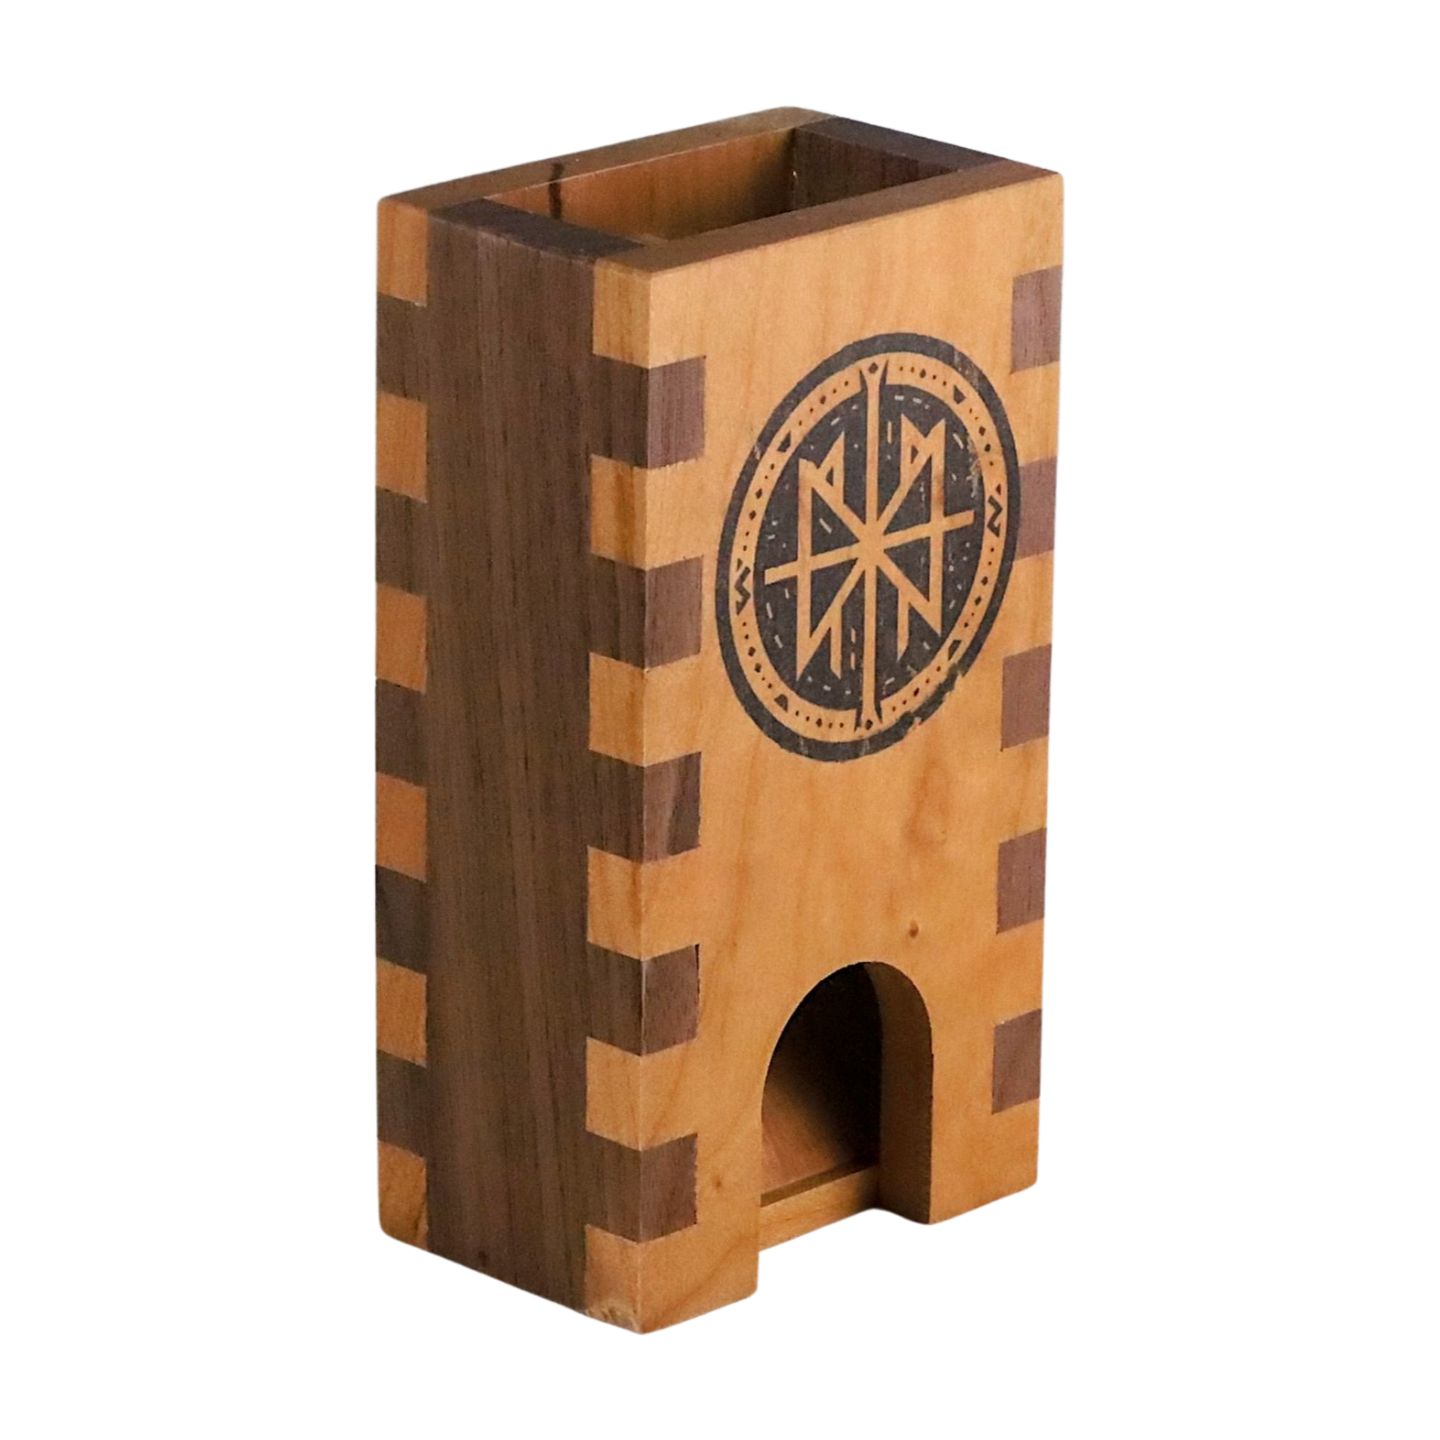 Viking Rune Circle Wood Dice Tower for DnD, Pathfinder, Shadowrun, TTRPG Dice Roller with Nordic Runes, Father's Day Gift, Family Game Night - Dragon Armor Games